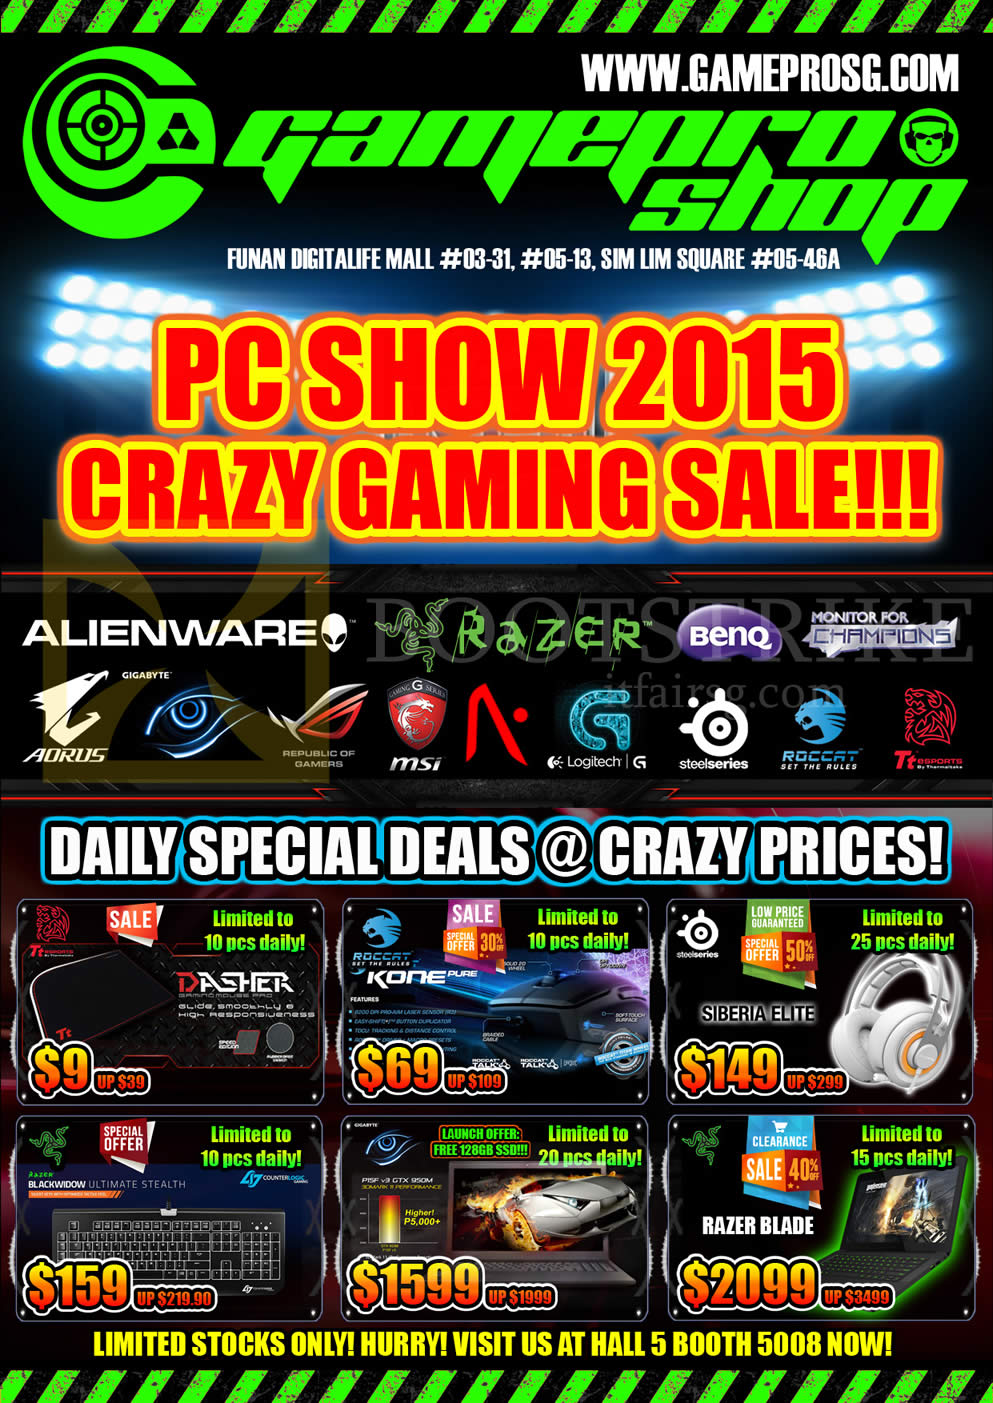 PC SHOW 2015 price list image brochure of Gamepro Shop Participating Brands, Daily Special Deals Keyboards, Notebooks, Headphones